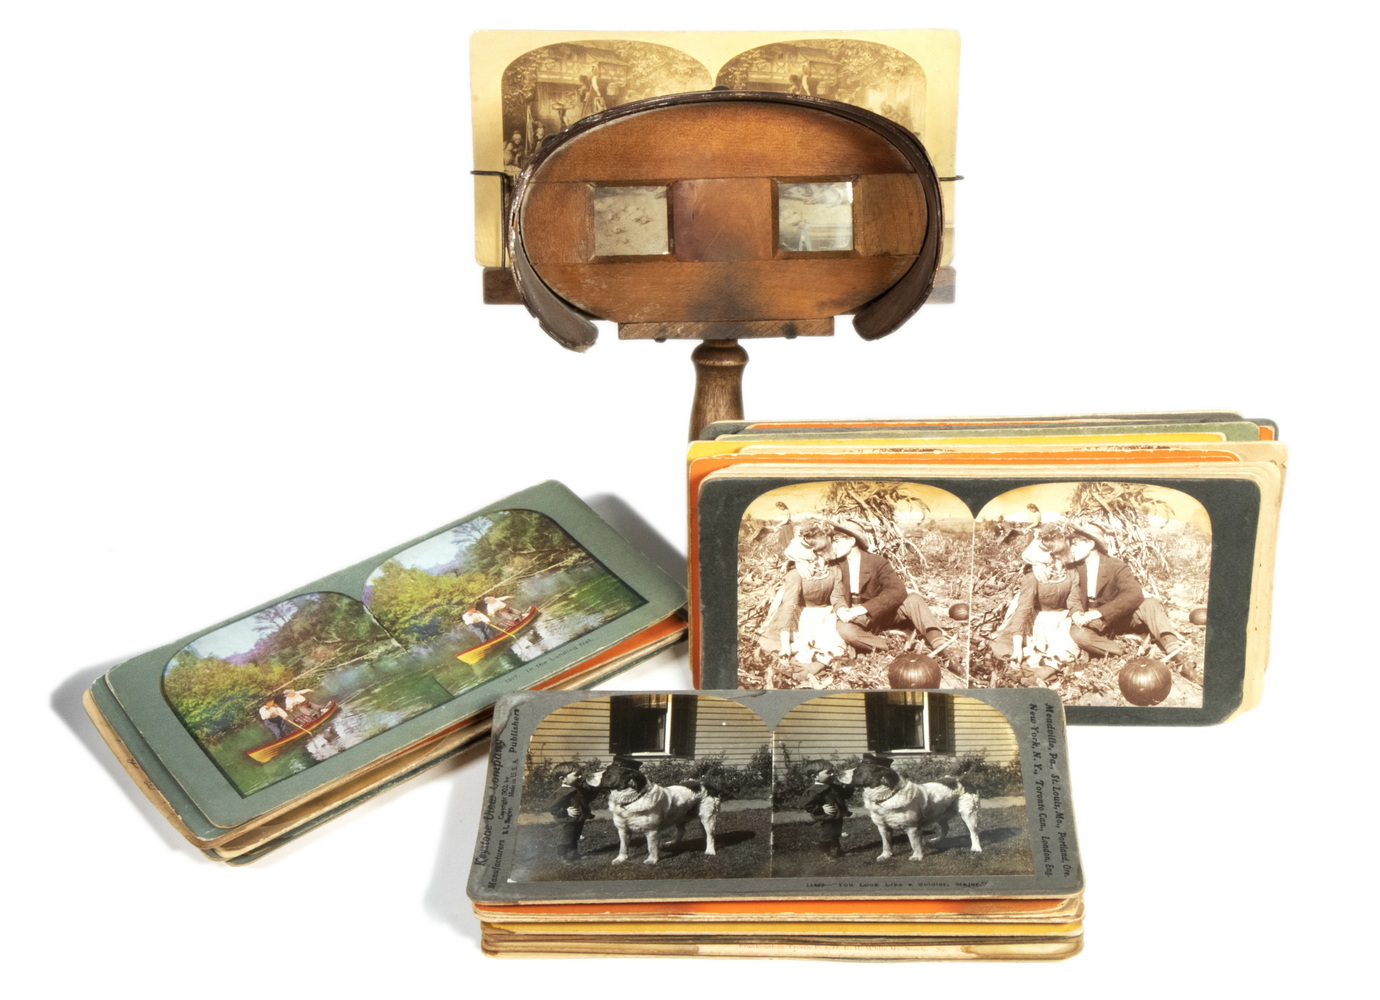 VINTAGE STEREOSCOPE VIEWER WITH 2b36c3